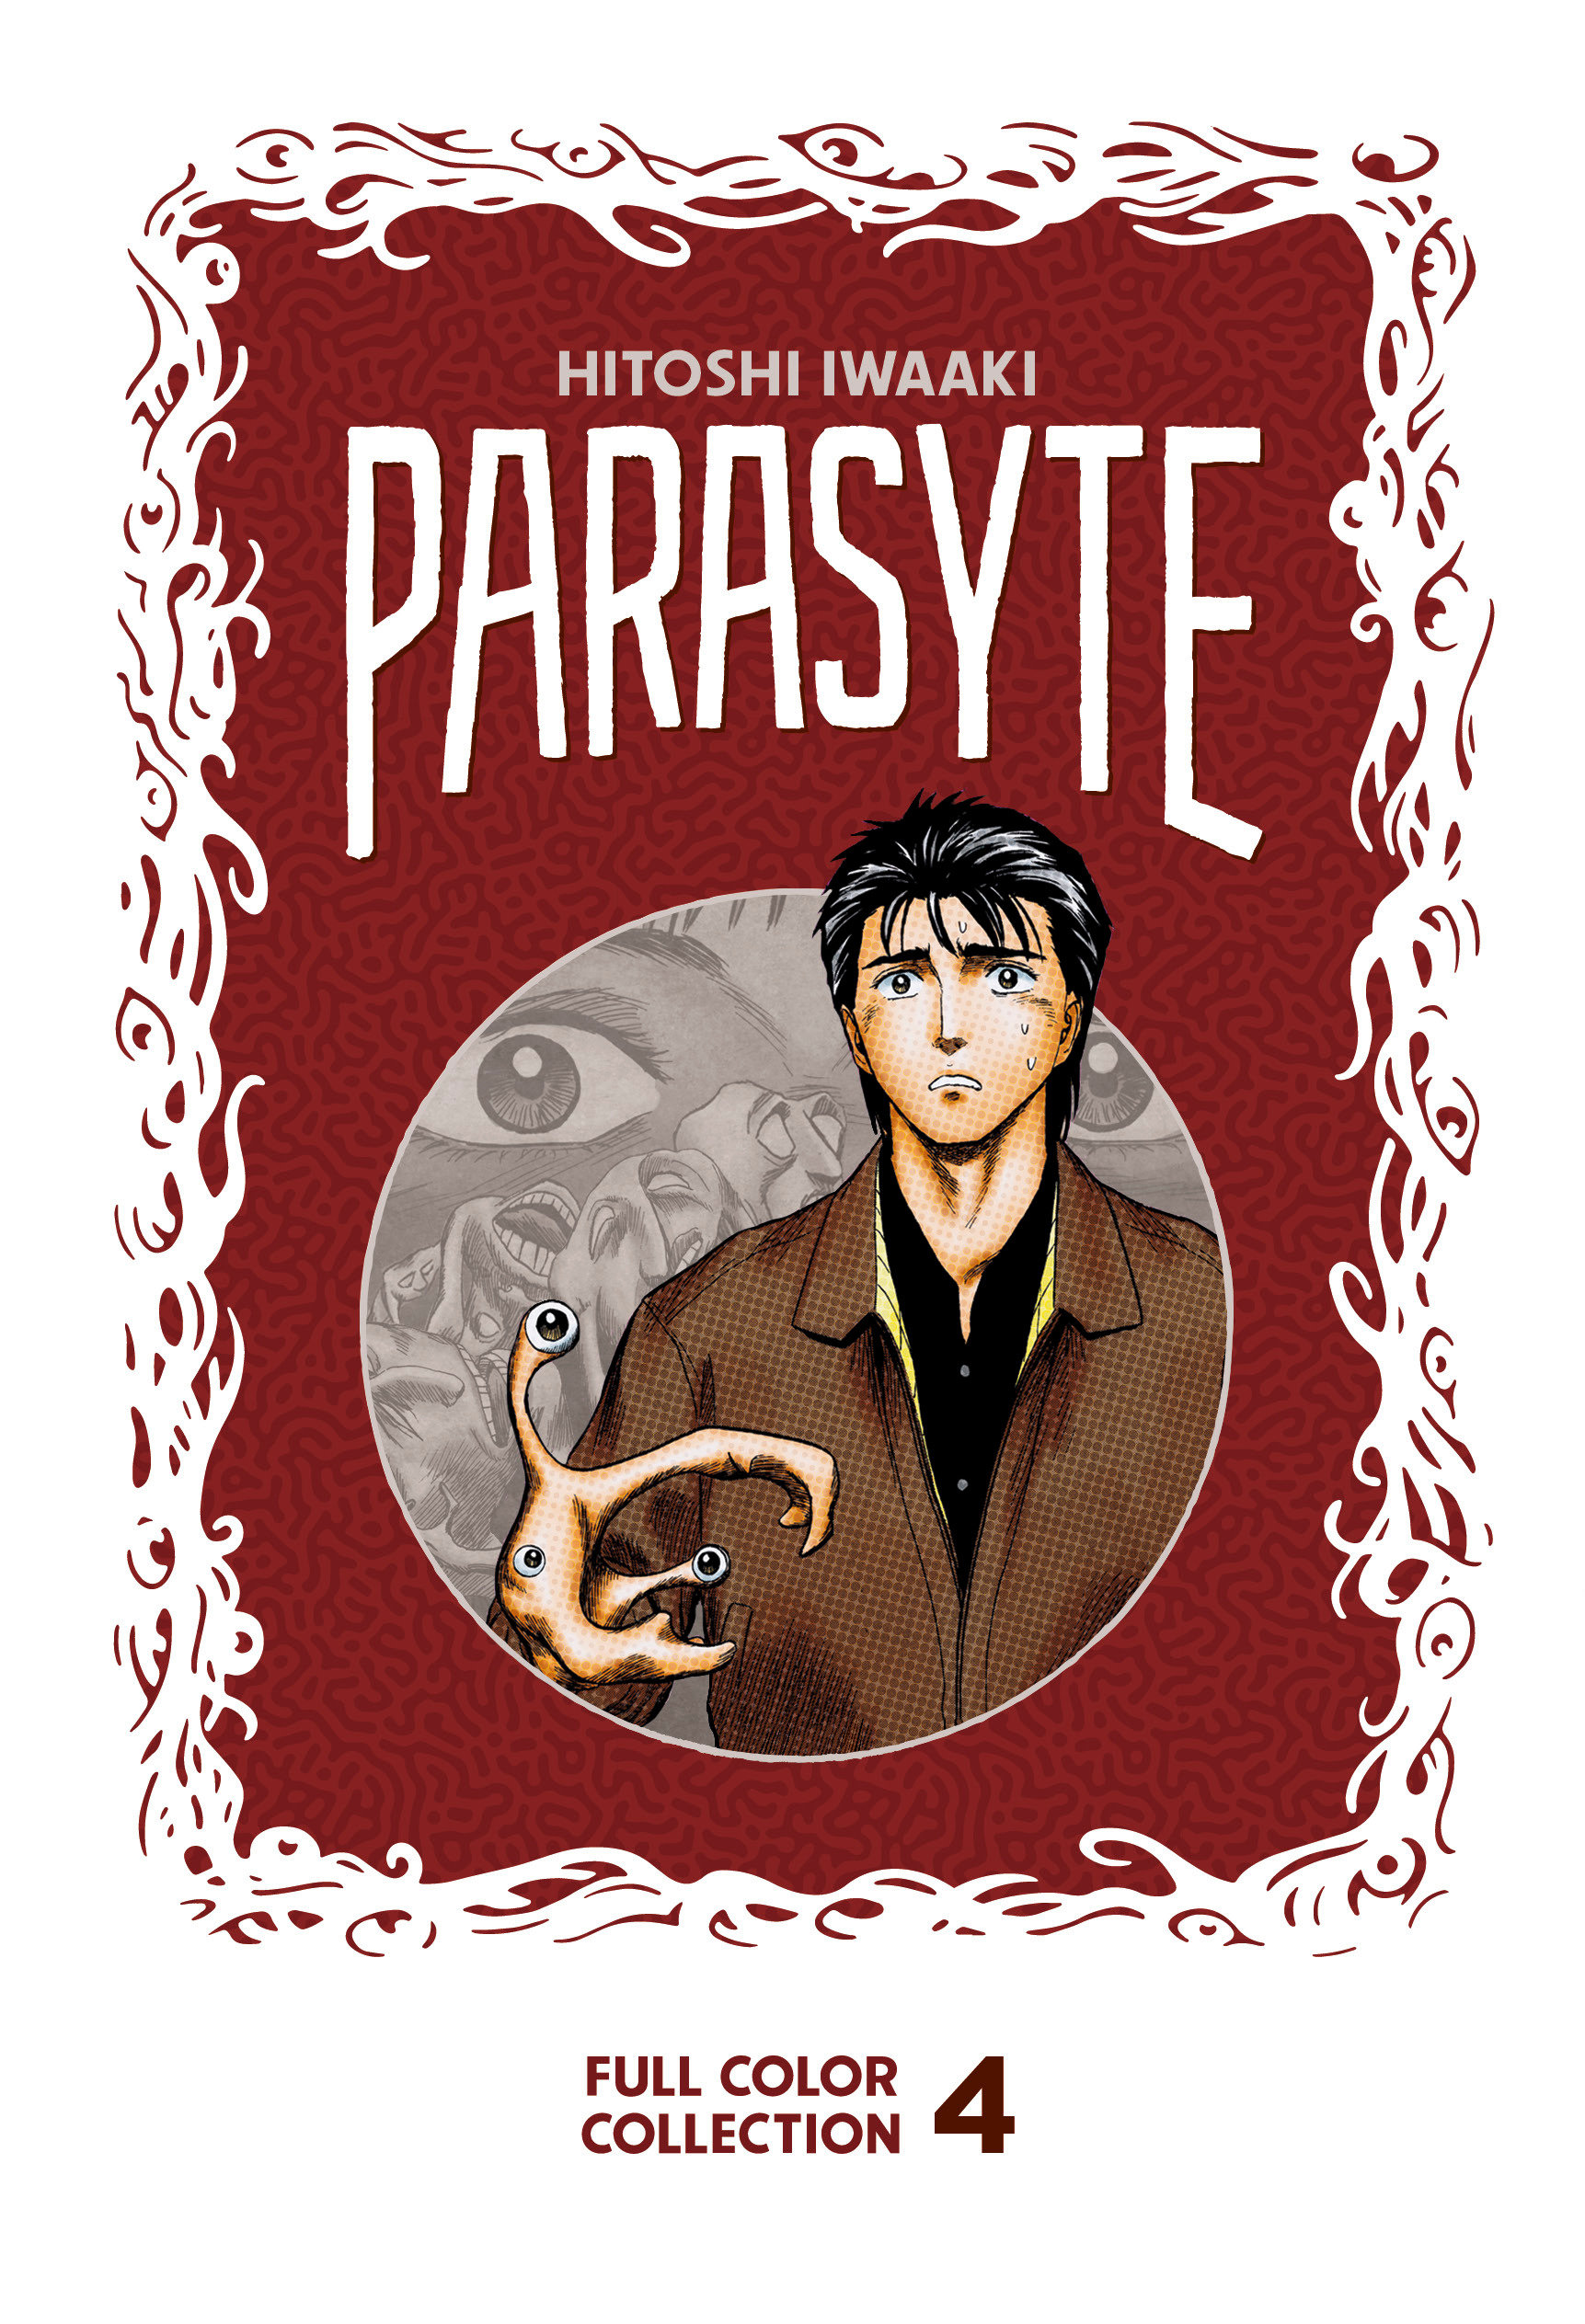 Parasyte Full Color Collection Manga Hardcover 4